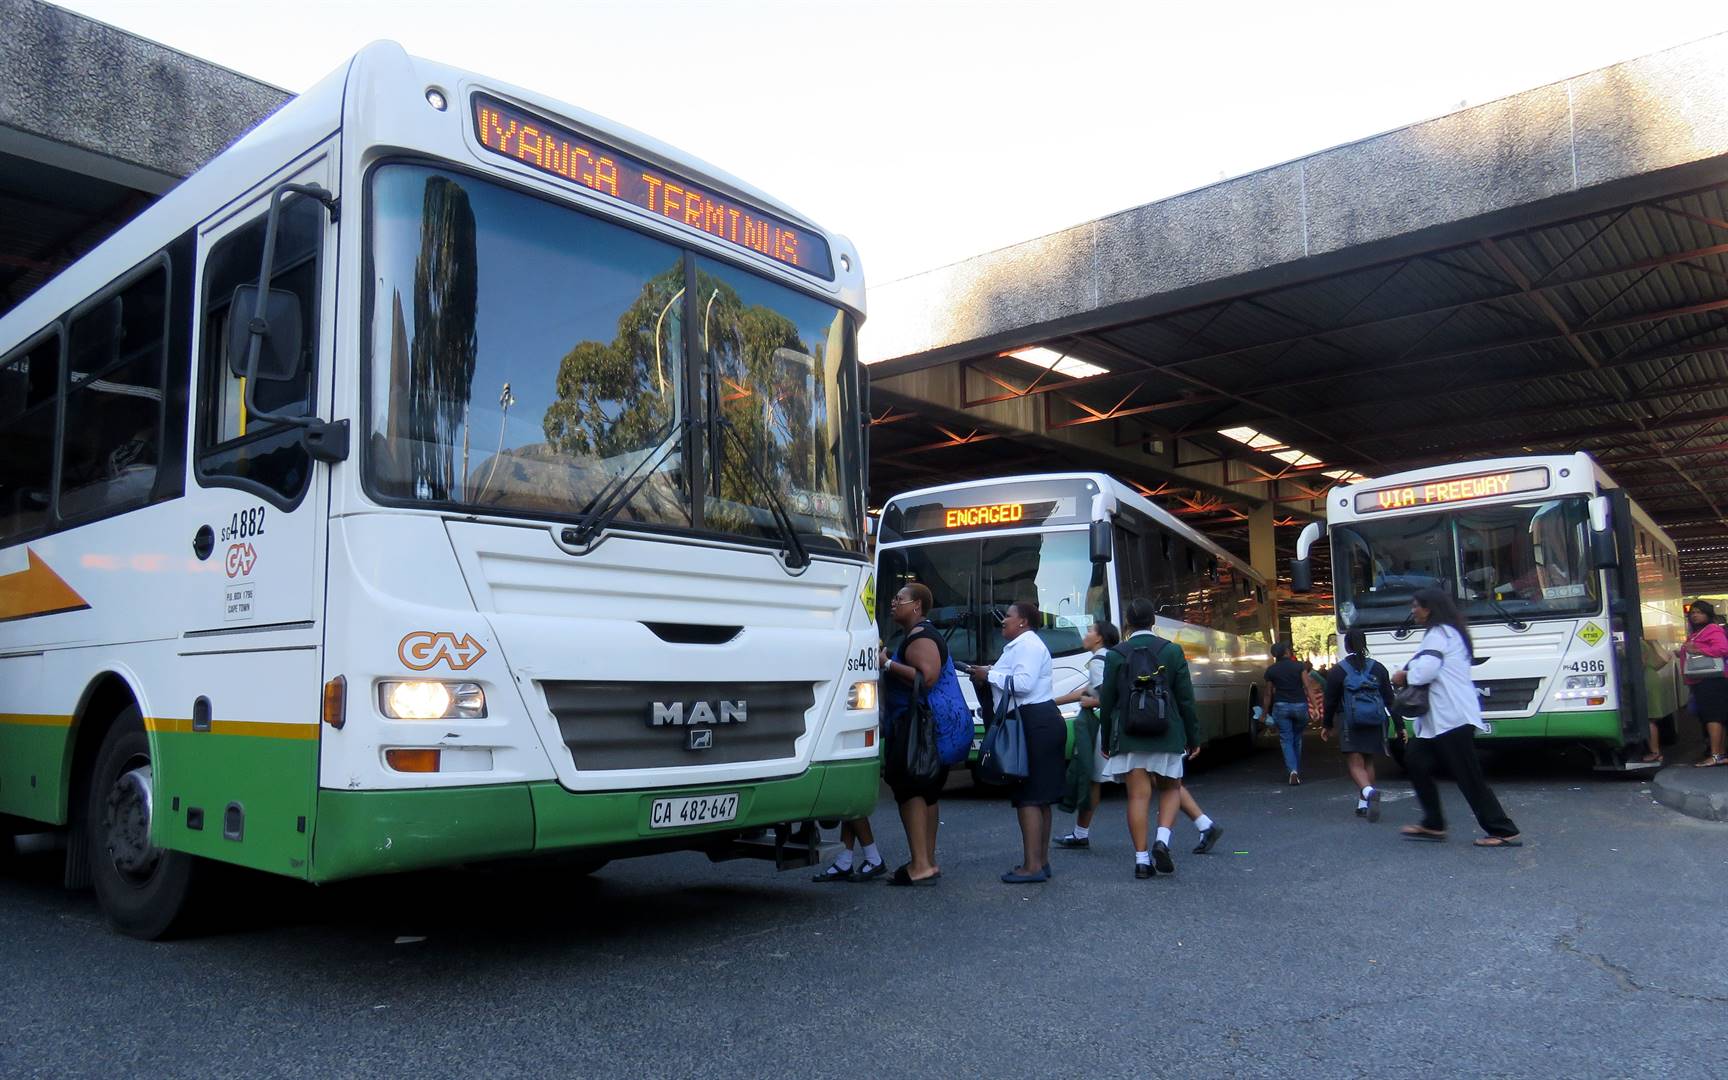 Golden Arrow buses at a terminus in Cape Town